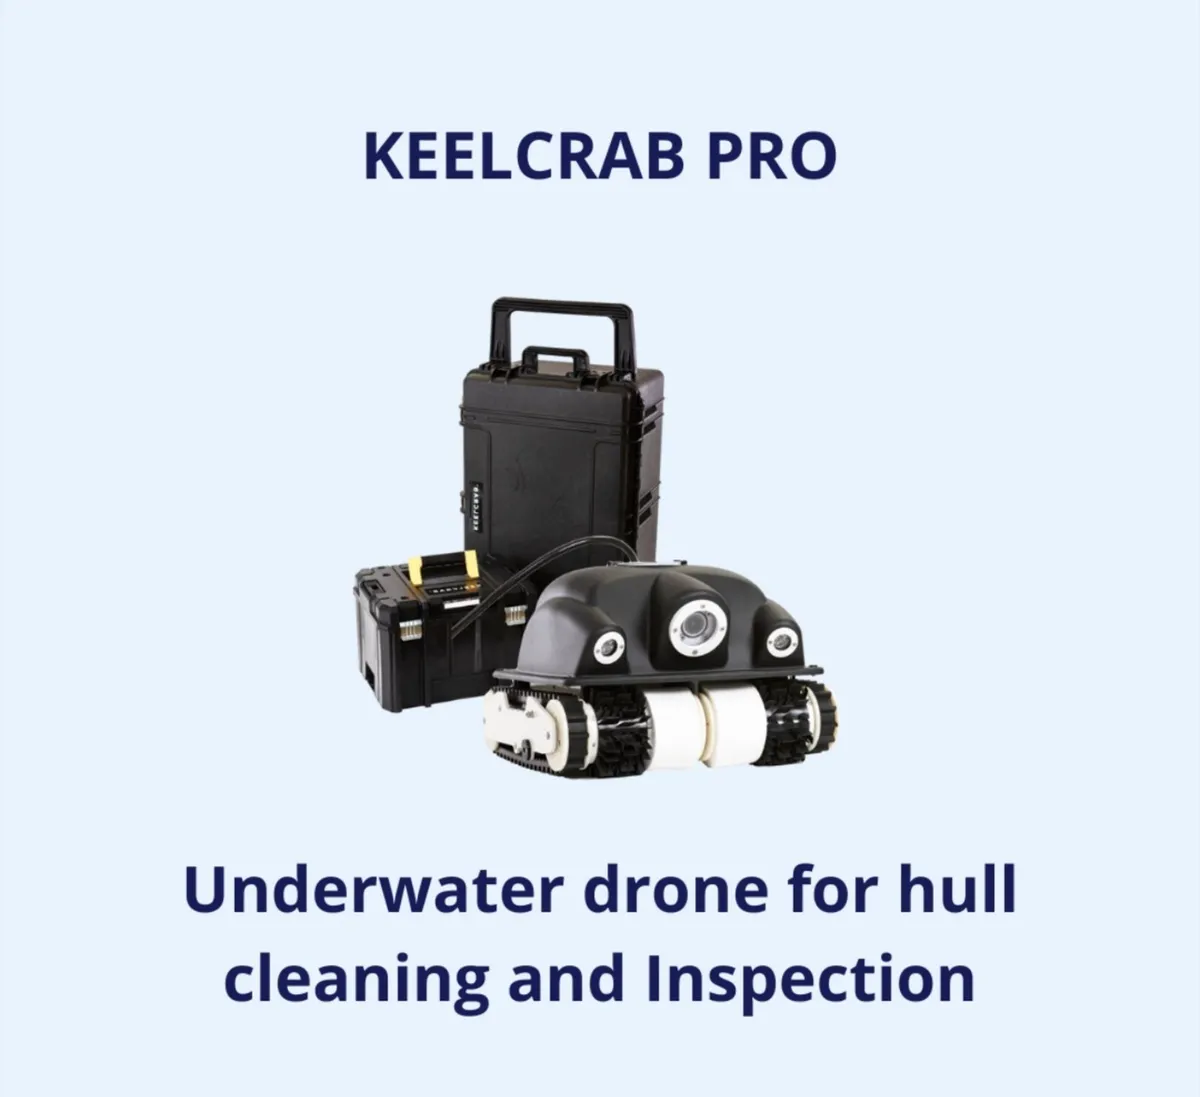 SALE -NEW Keelcrab Pro profesional underwater dron